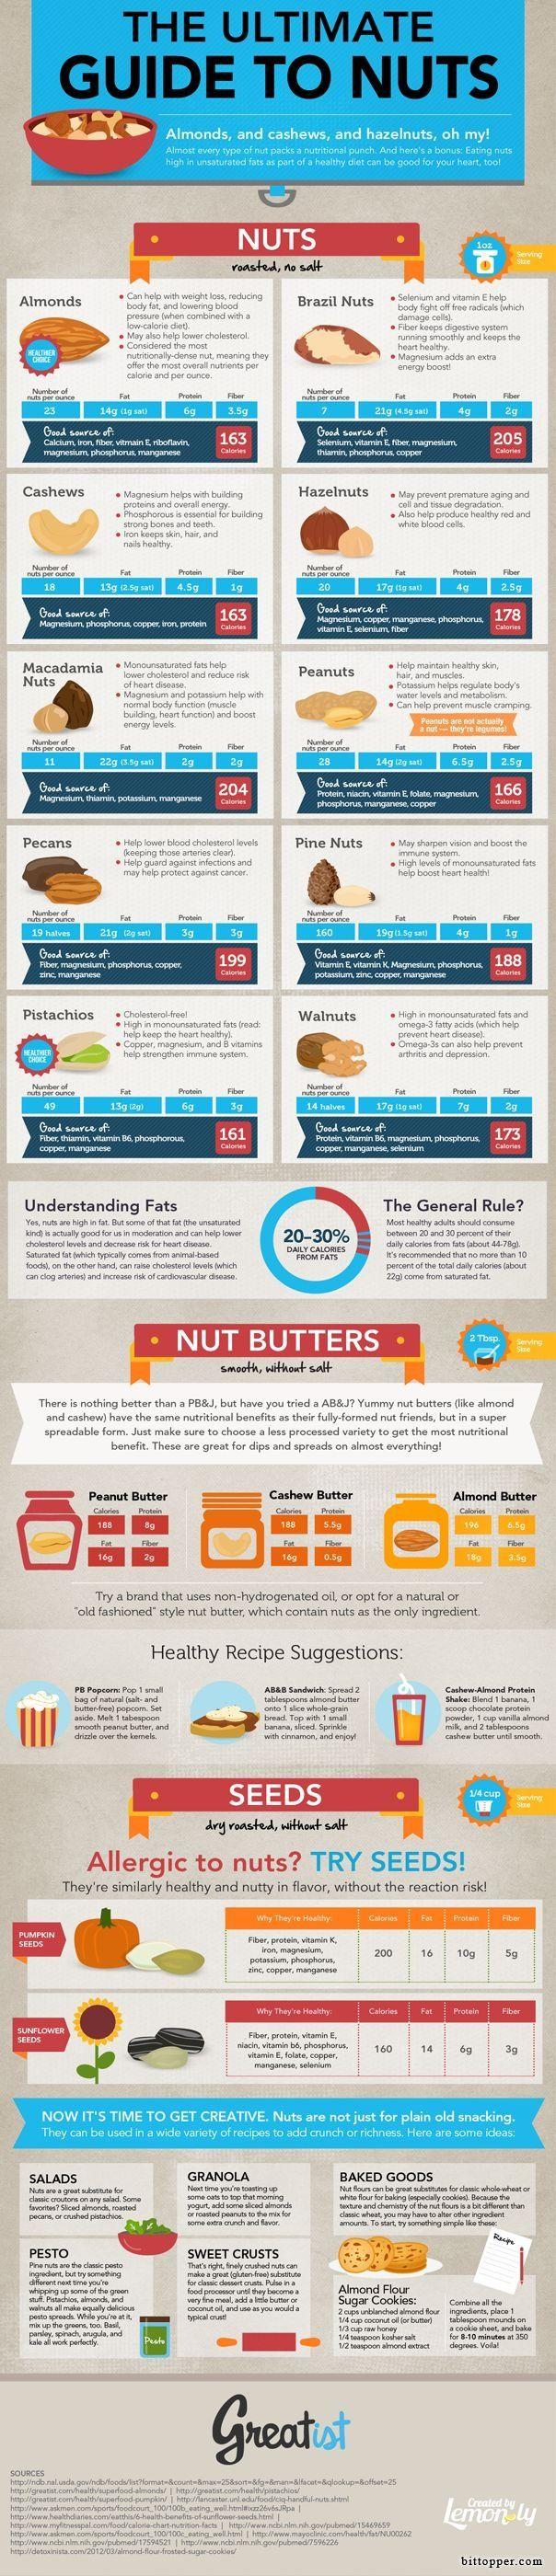 Wedding - The Ultimate Guide To Nuts [INFOGRAPHIC]